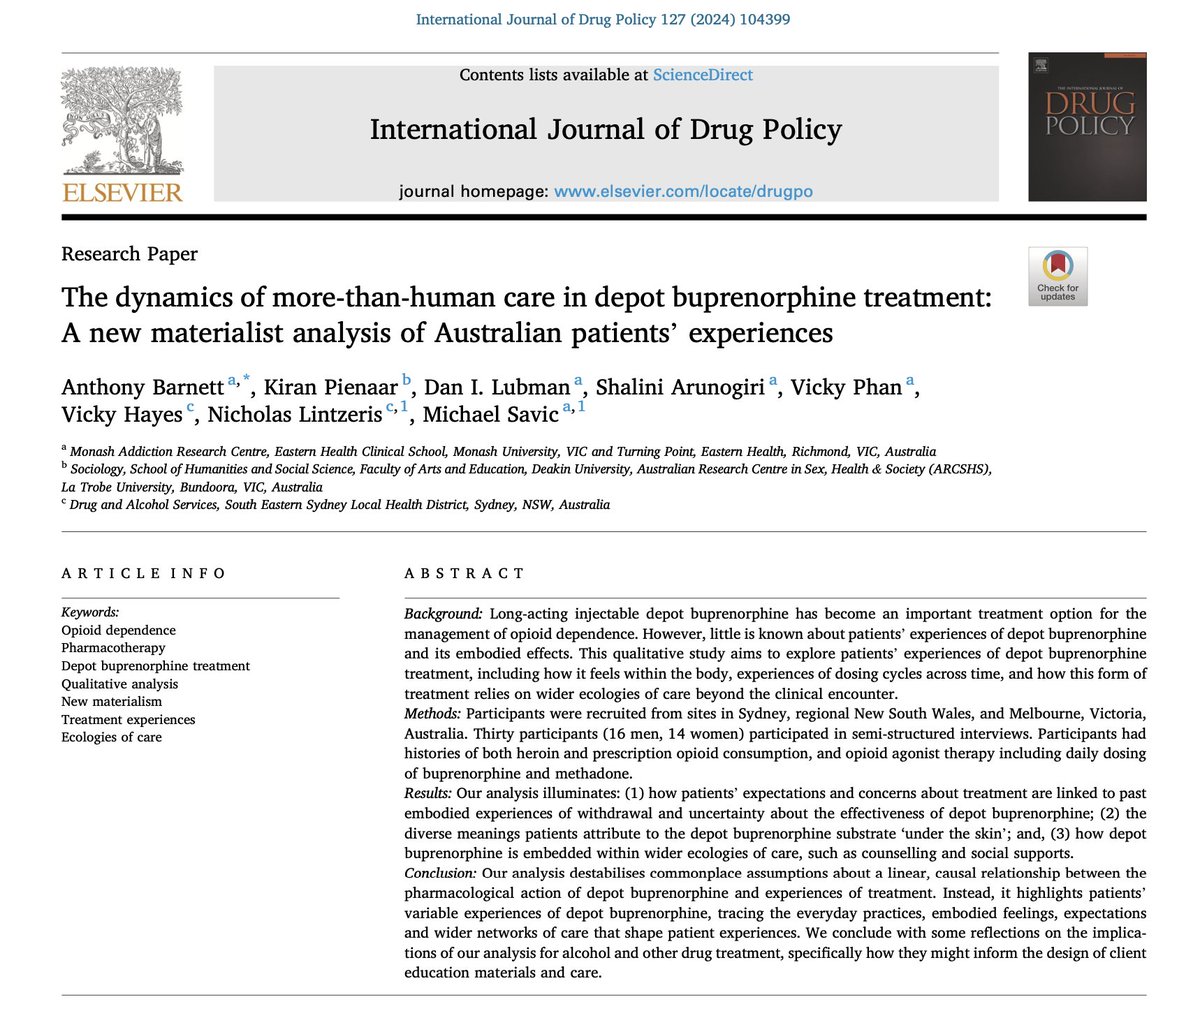 'The dynamics of more-than-human care in depot buprenorphine treatment: A new materialist analysis of Australian patients’ experiences' by @tonyibarnett et al (2024) via @ijdrugpolicy...how do patients feel about long acting buprenorphine? Link: sciencedirect.com/science/articl…